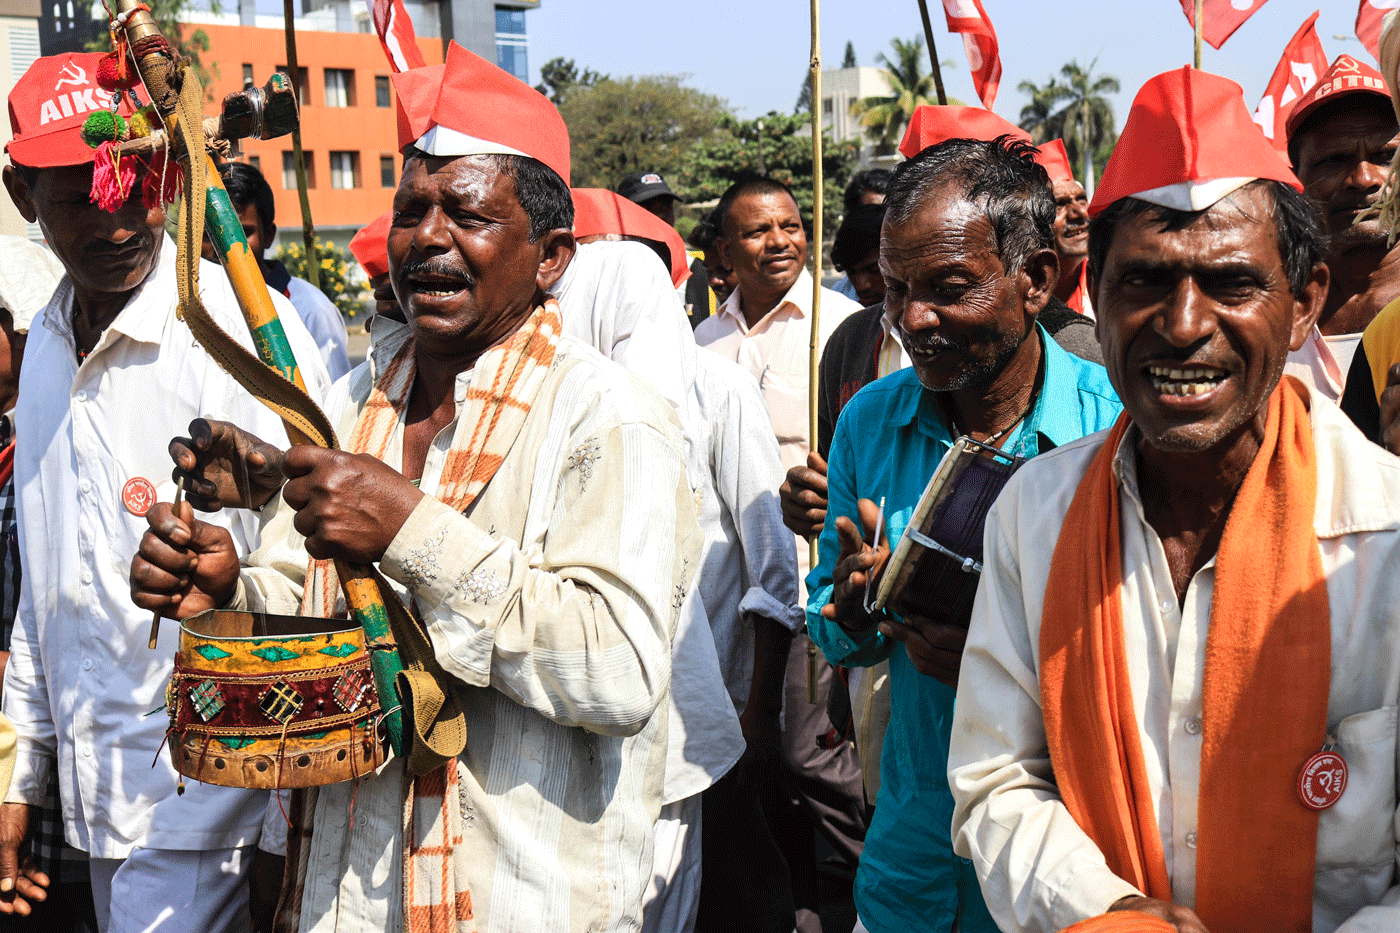 Gavit and Chavan, along with other farmers from Dindori taluka, are singing songs in praise of the farmers’ protest